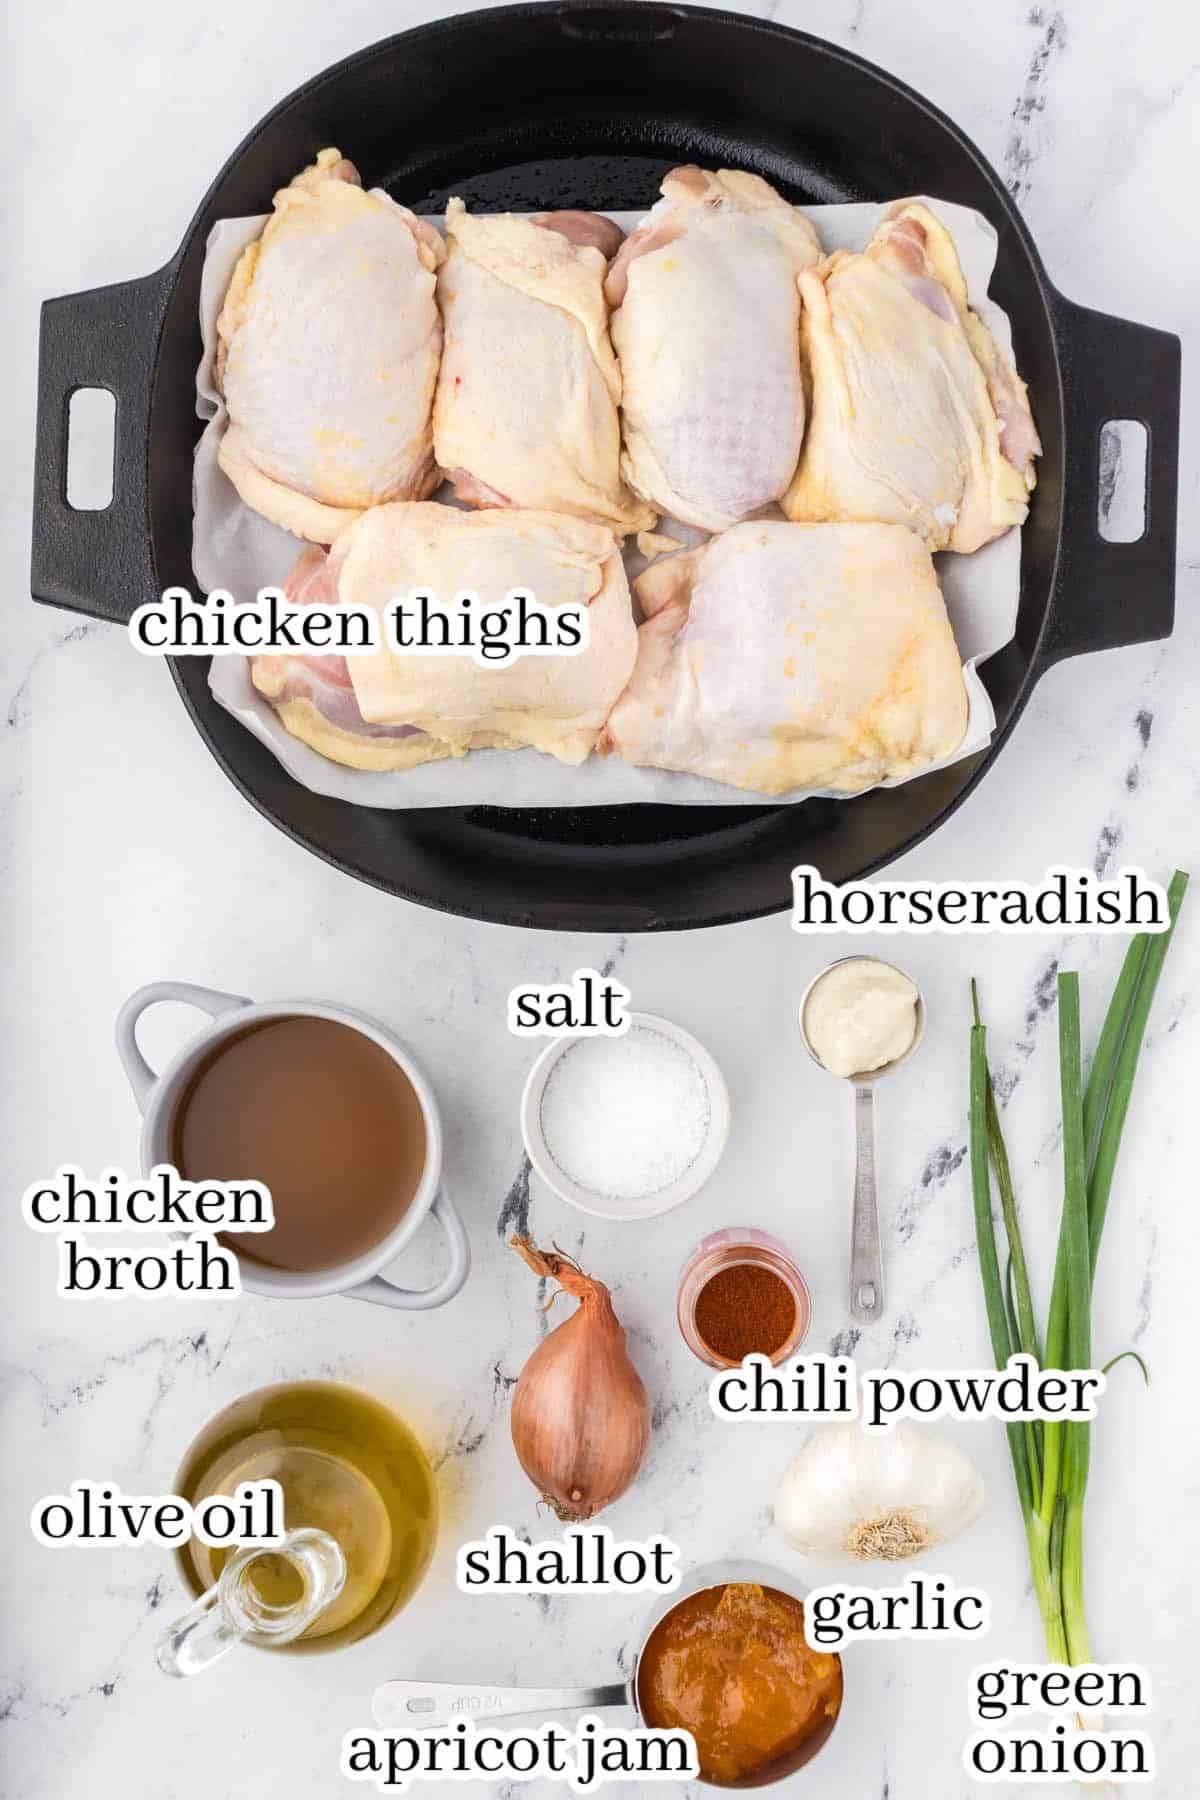 Ingredients to make the chicken recipe, with print overlay for clarification.